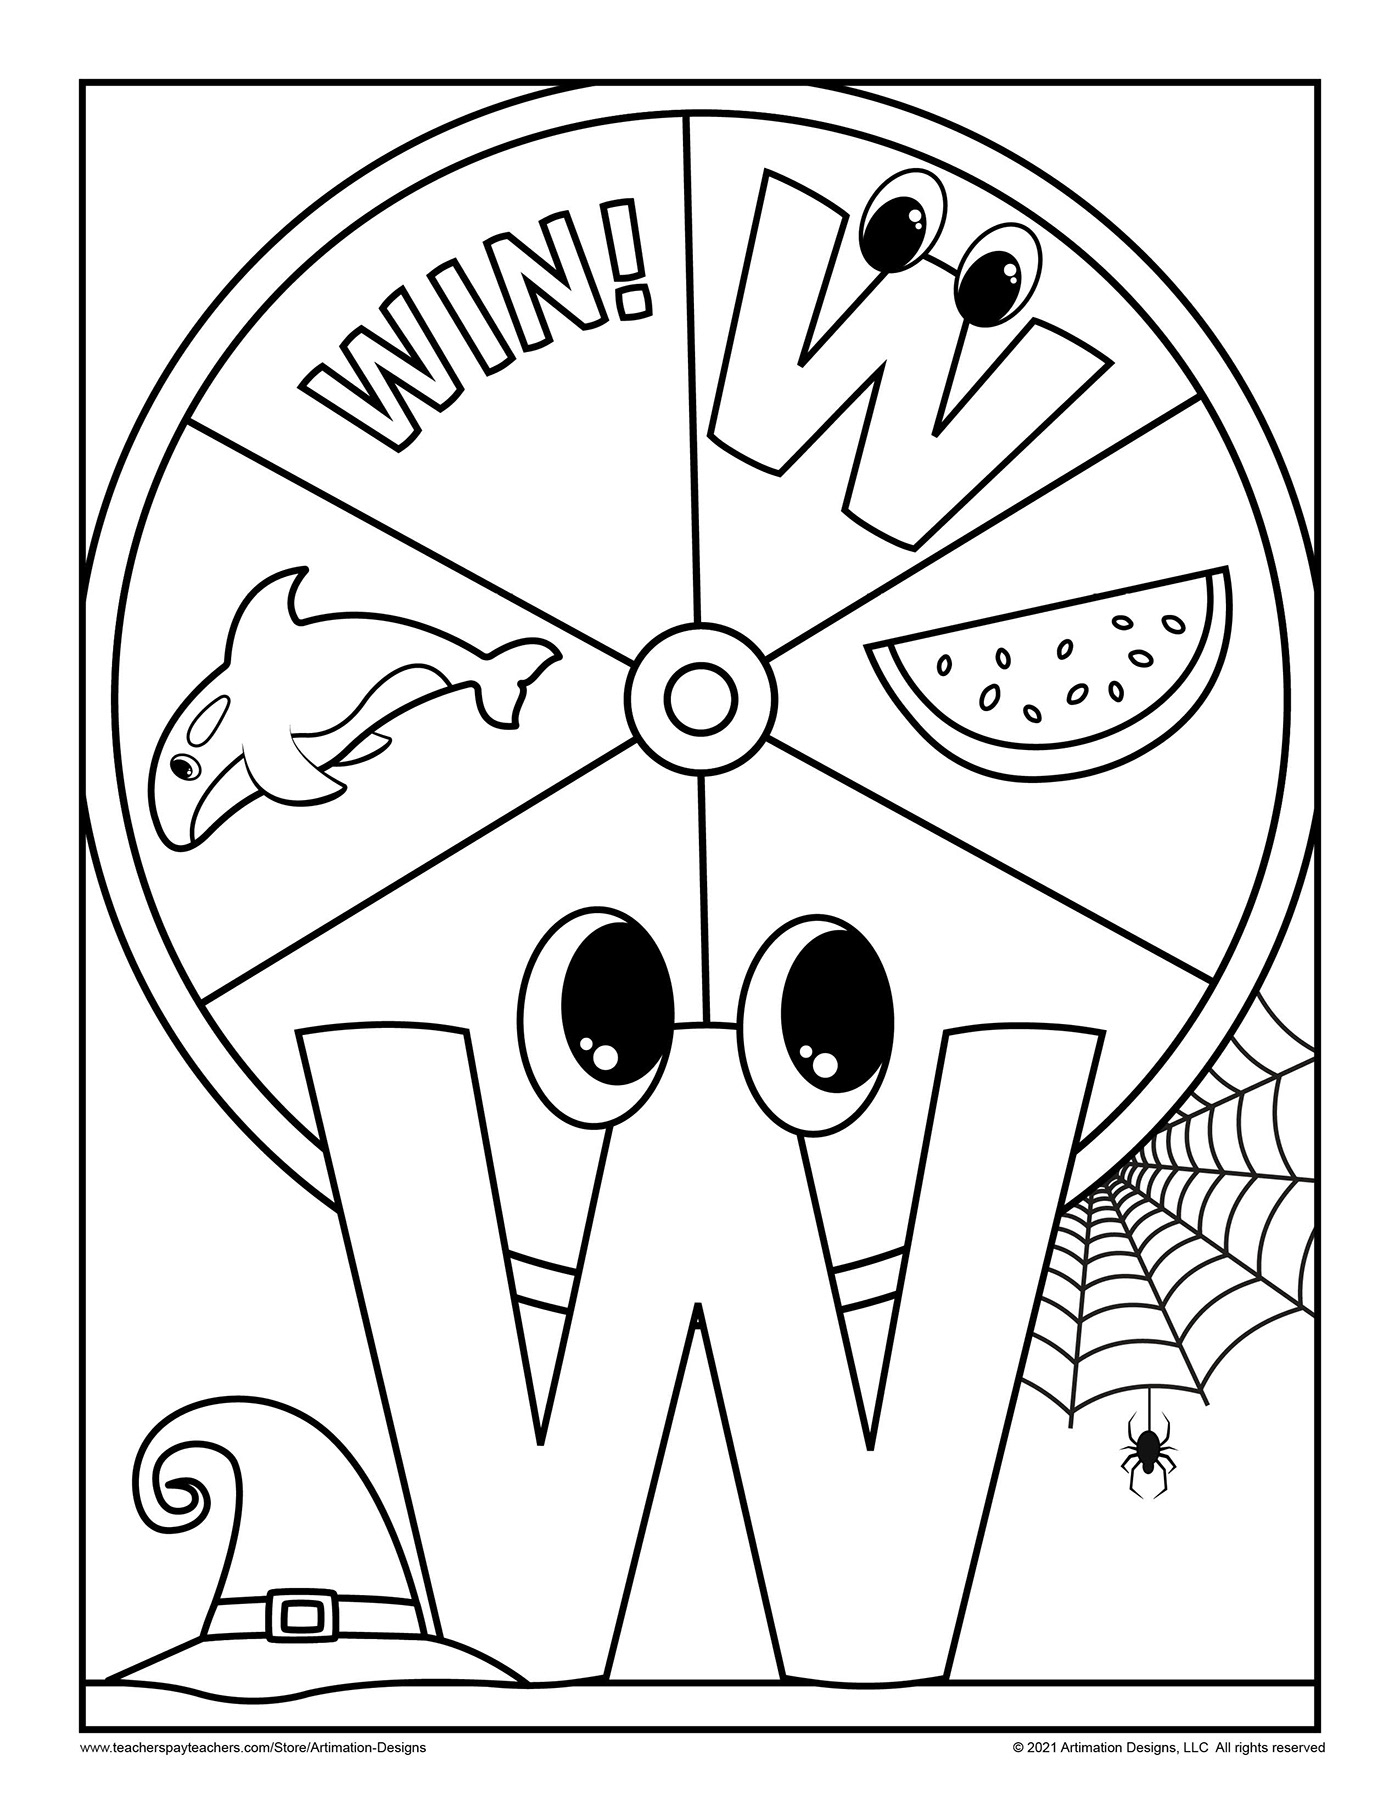 Alphabet Coloring Book for Kids on Behance